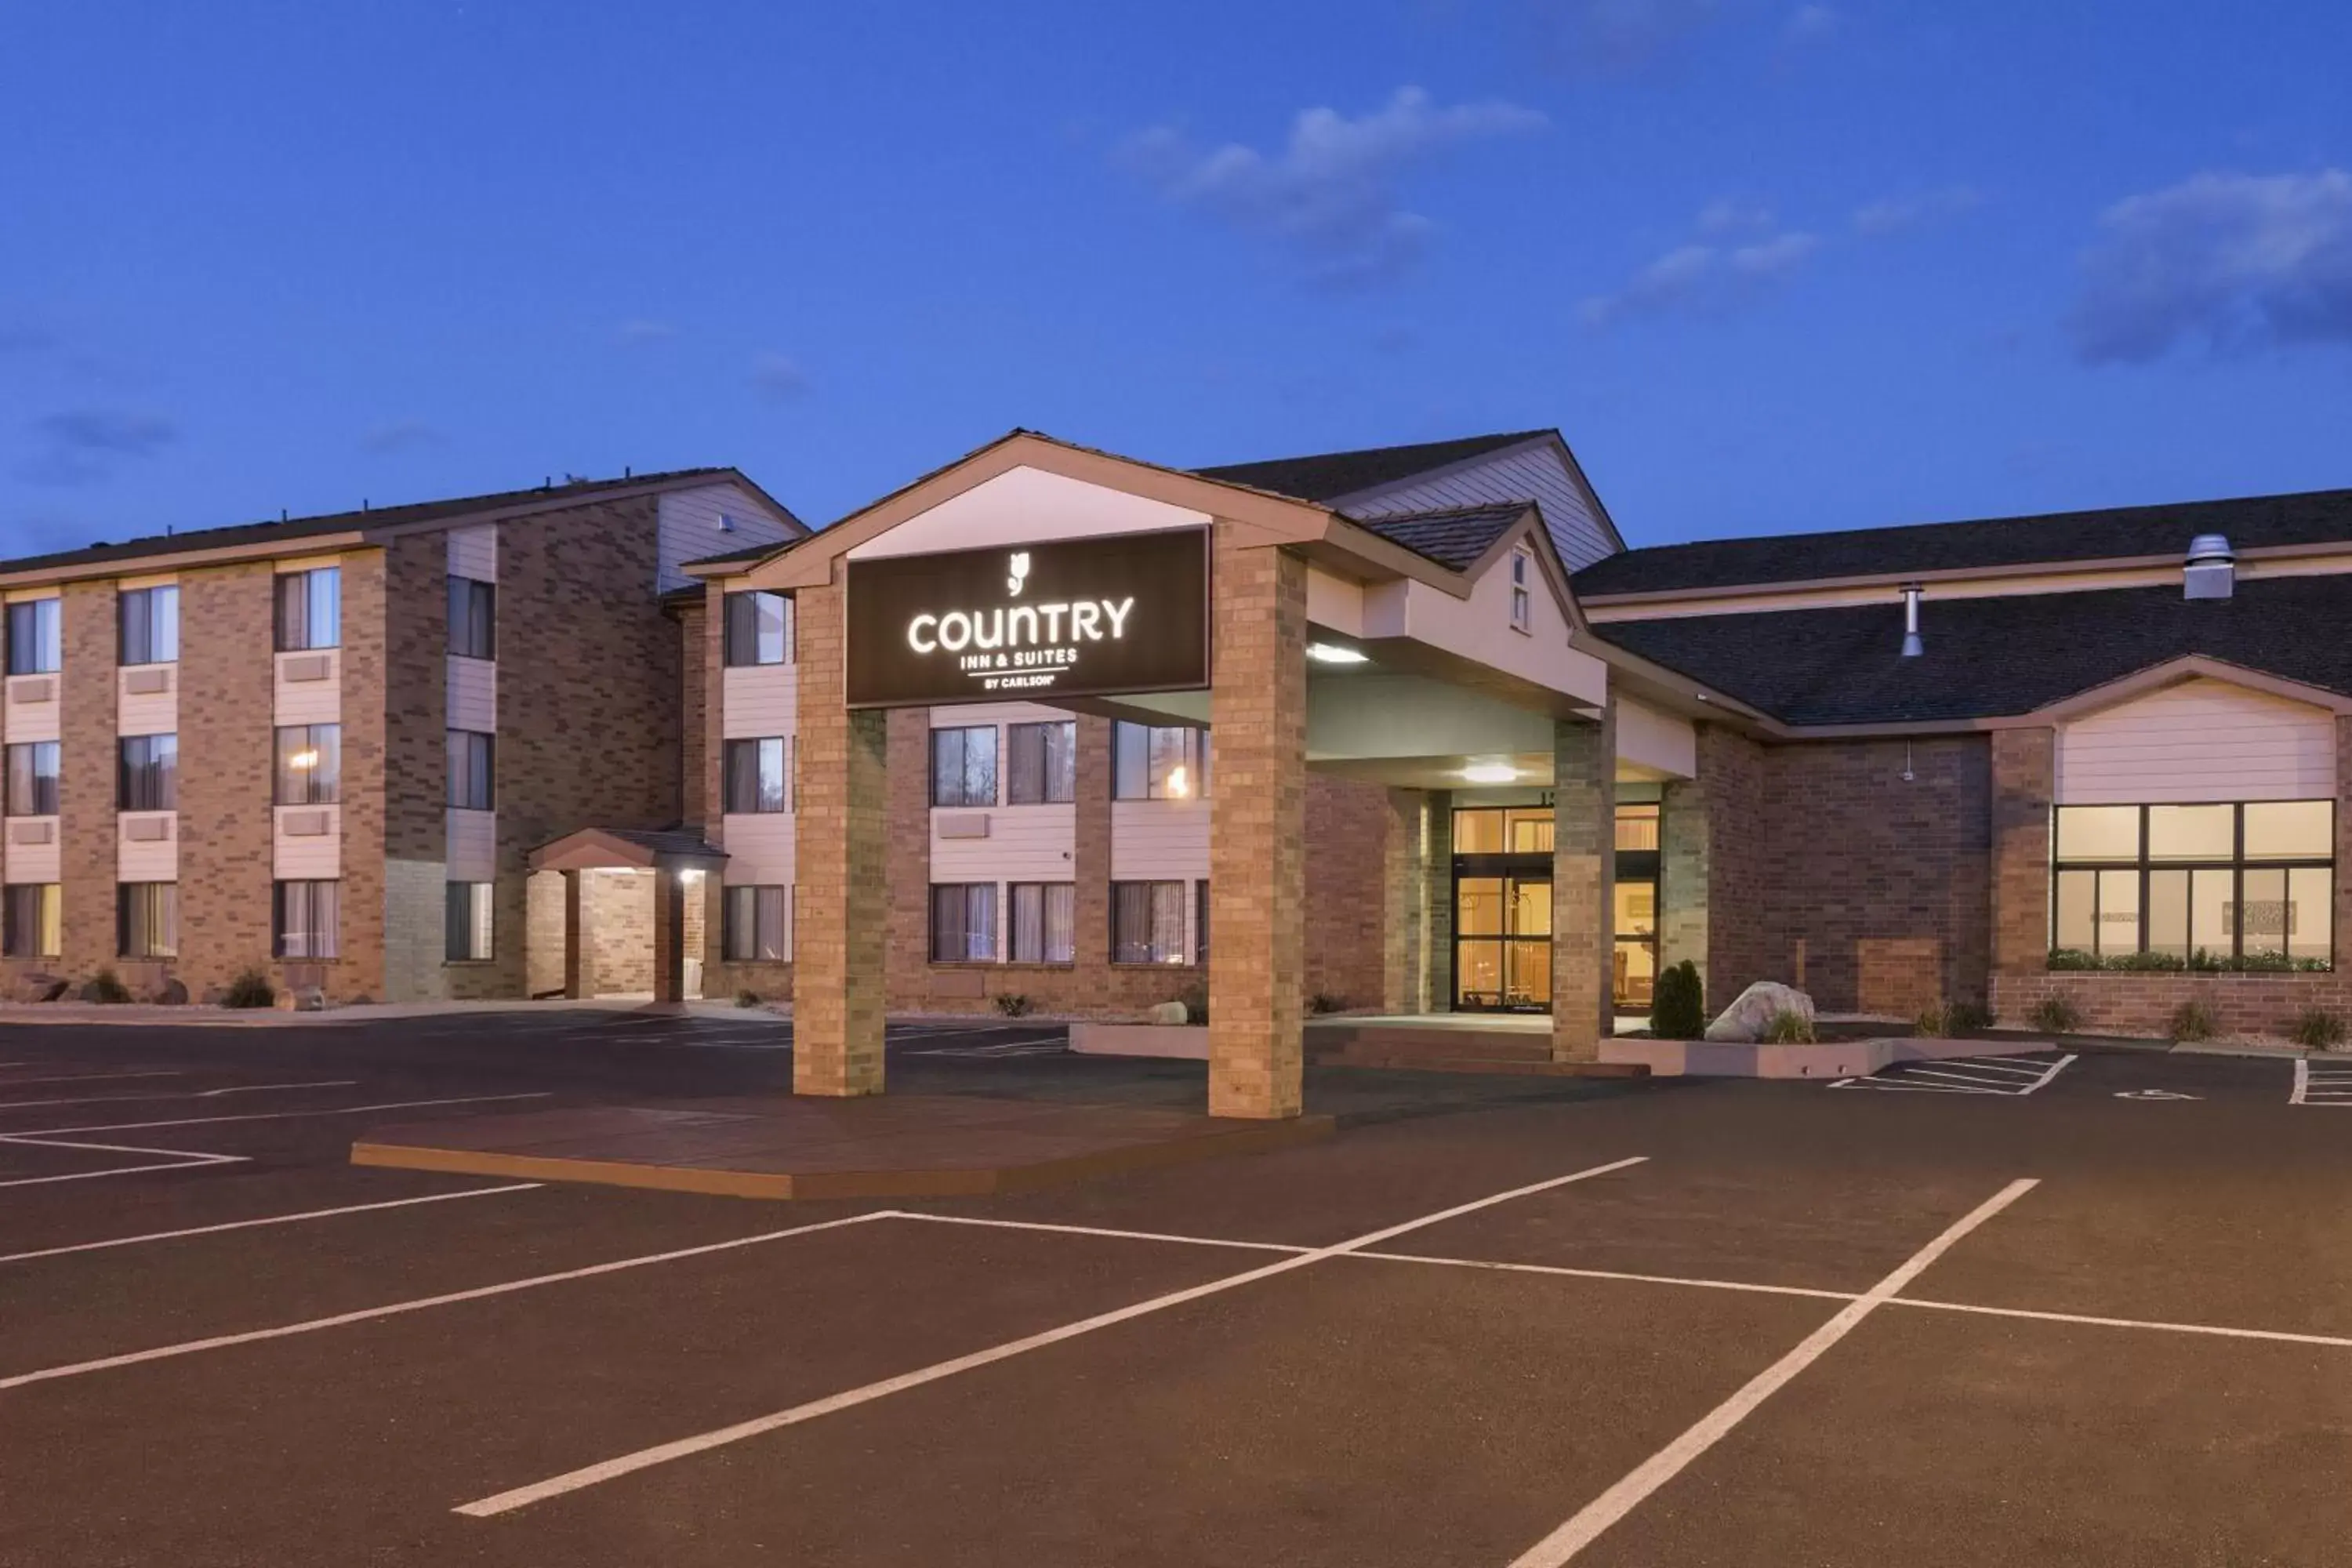 Sunset, Facade/Entrance in Country Inn & Suites by Radisson, Coon Rapids, MN